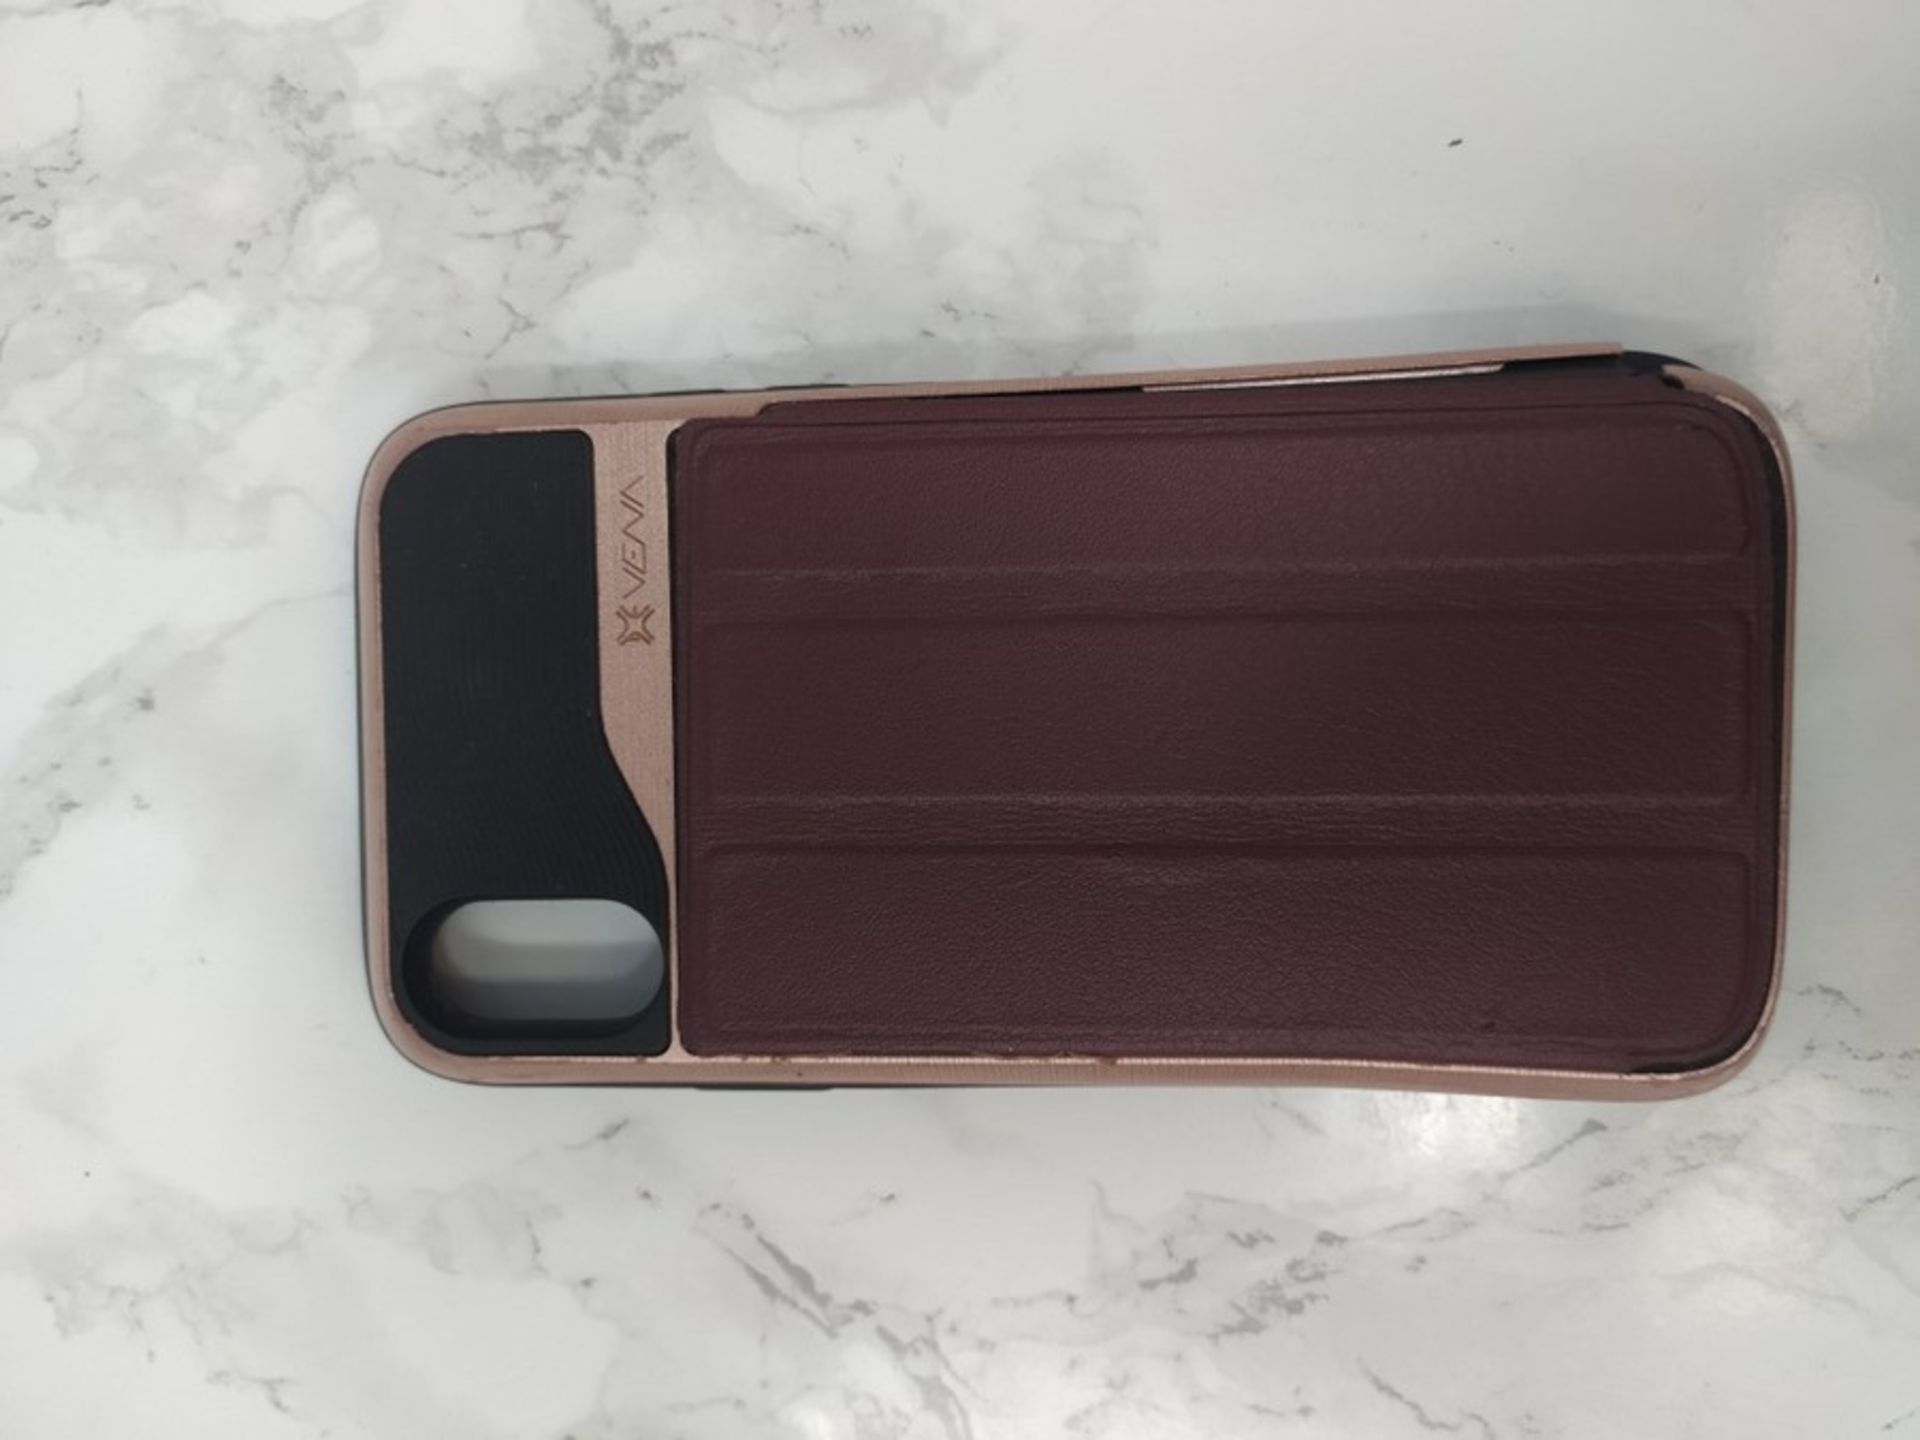 Vena iPhone X/XS Wallet Case, vCommute (Military Grade Drop Protection) Flip Leather C - Image 3 of 3